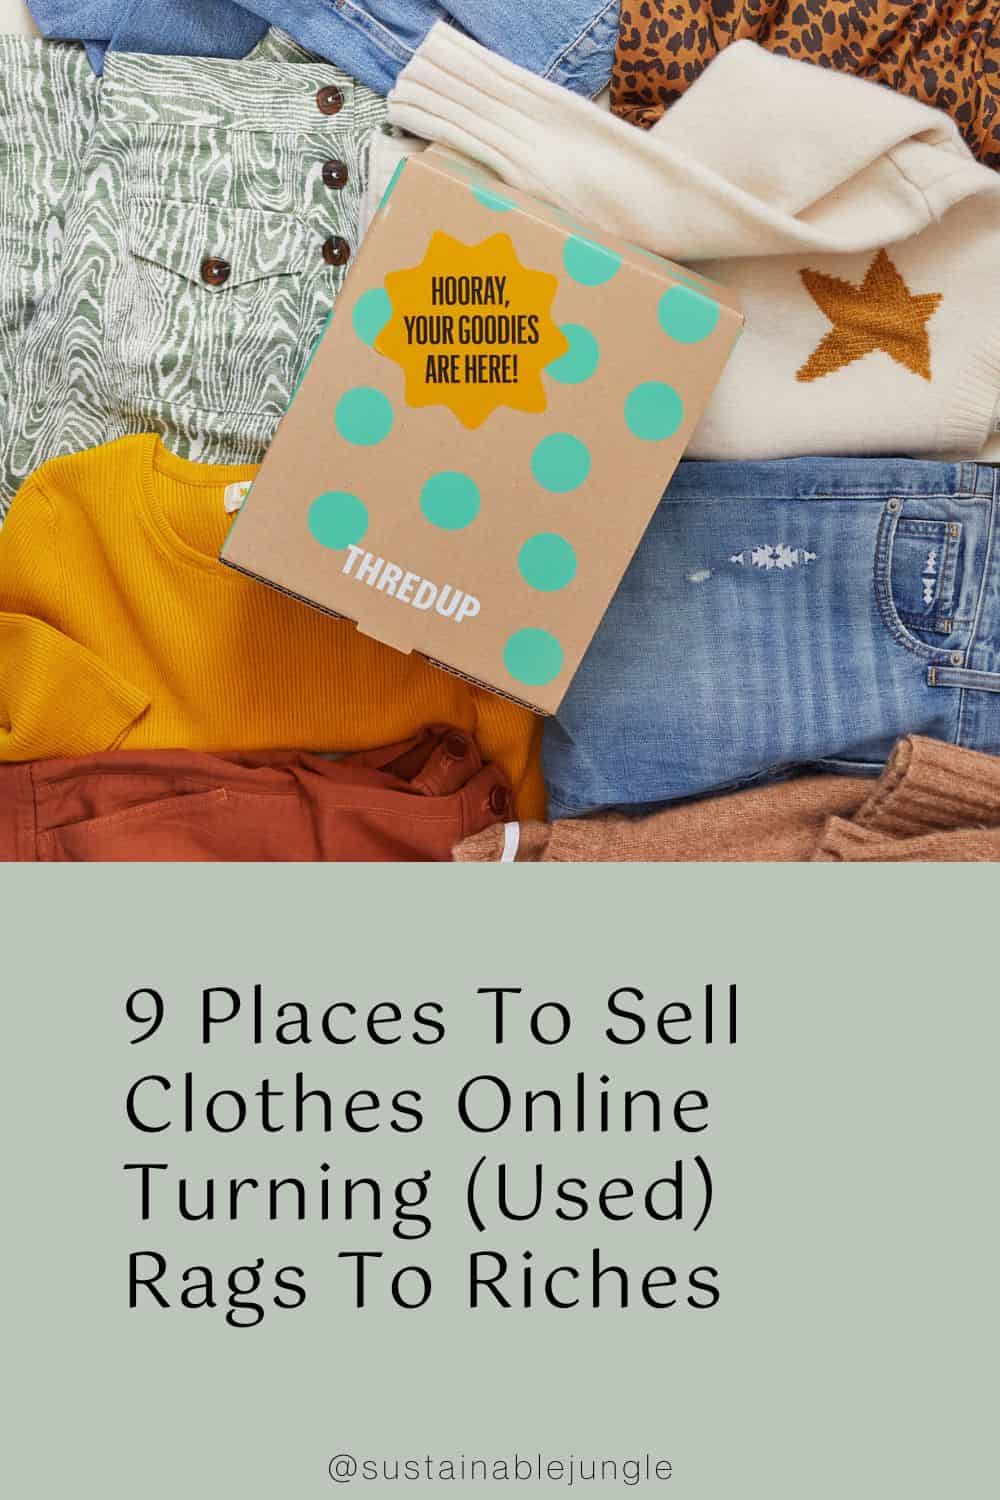 9 Places To Sell Clothes Online Turning (Used) Rags To Riches Image by thredUP #sellusedclothesonline #sellingusedclothes #sellclothesonline #sellingclothesonline #wheretosellclothesonline #bestplacestosellclothesonline #sustainablejungle